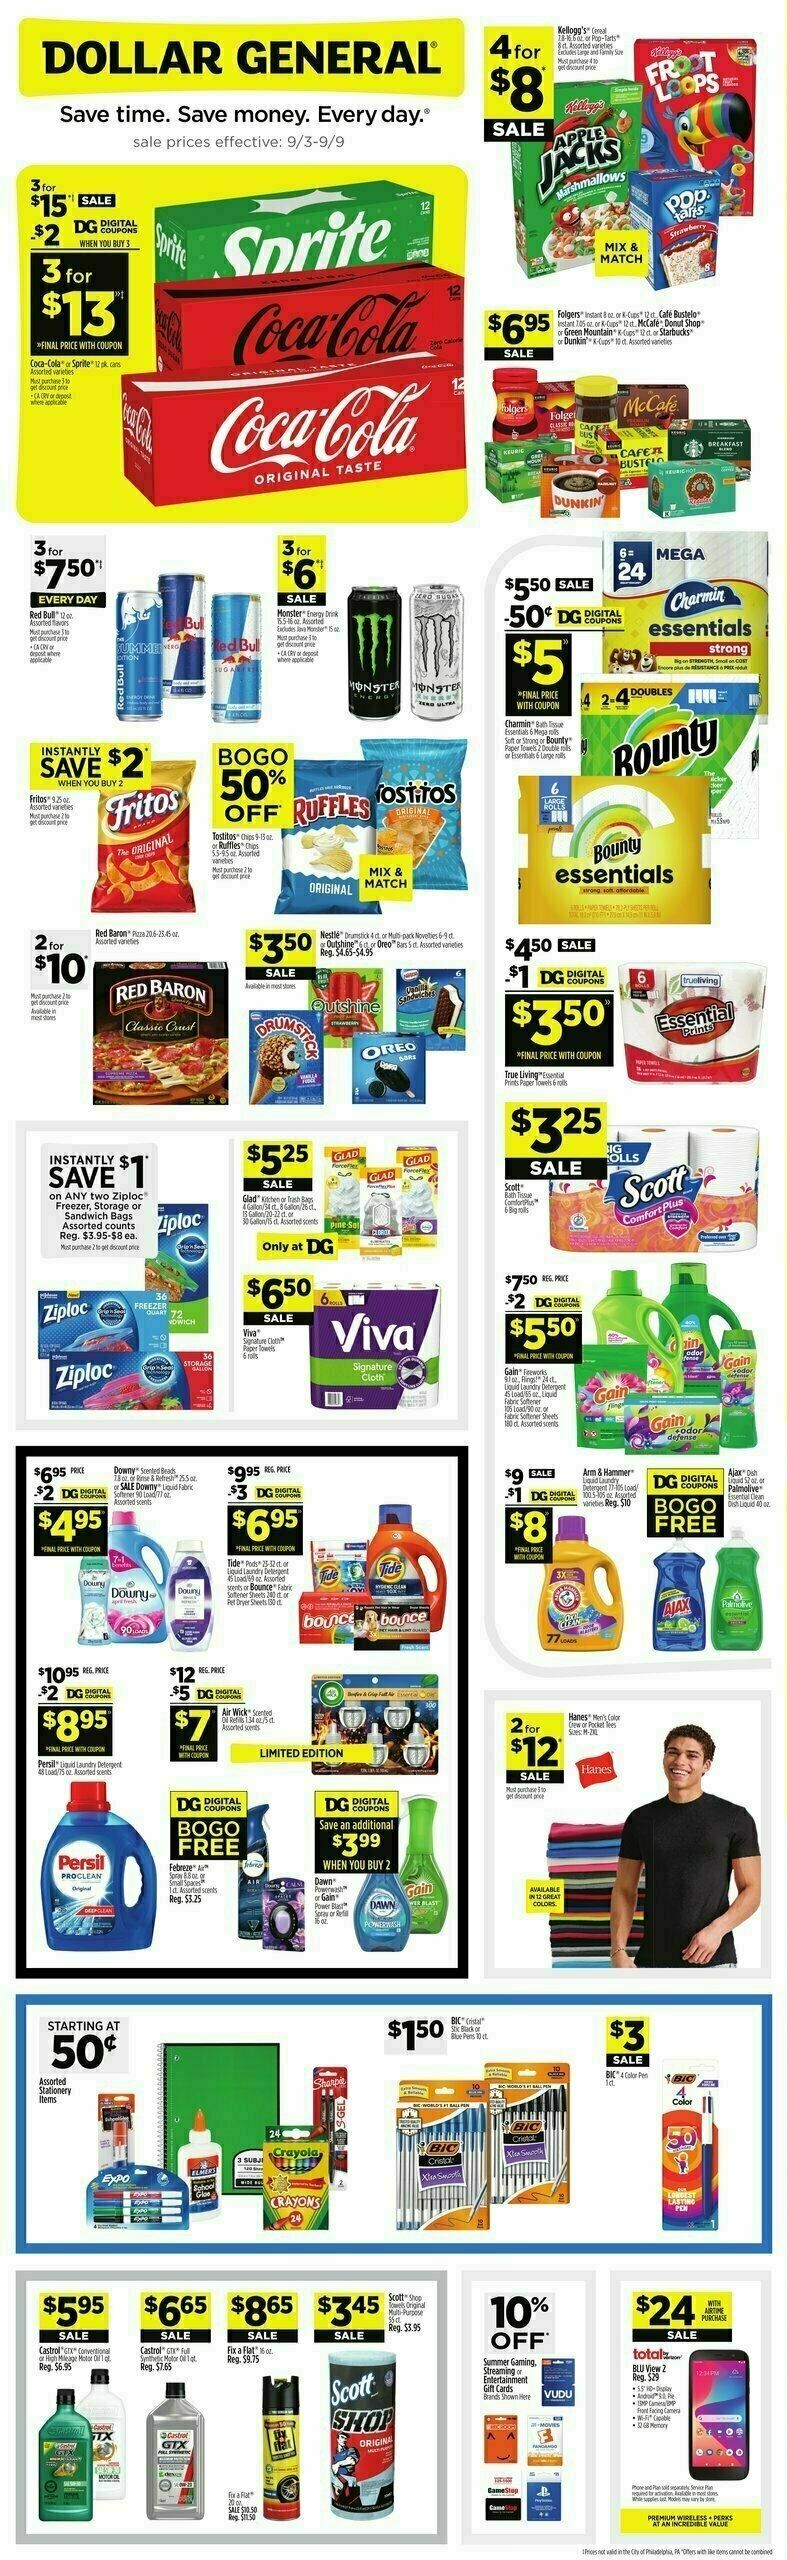 Dollar General Weekly Ad from September 5